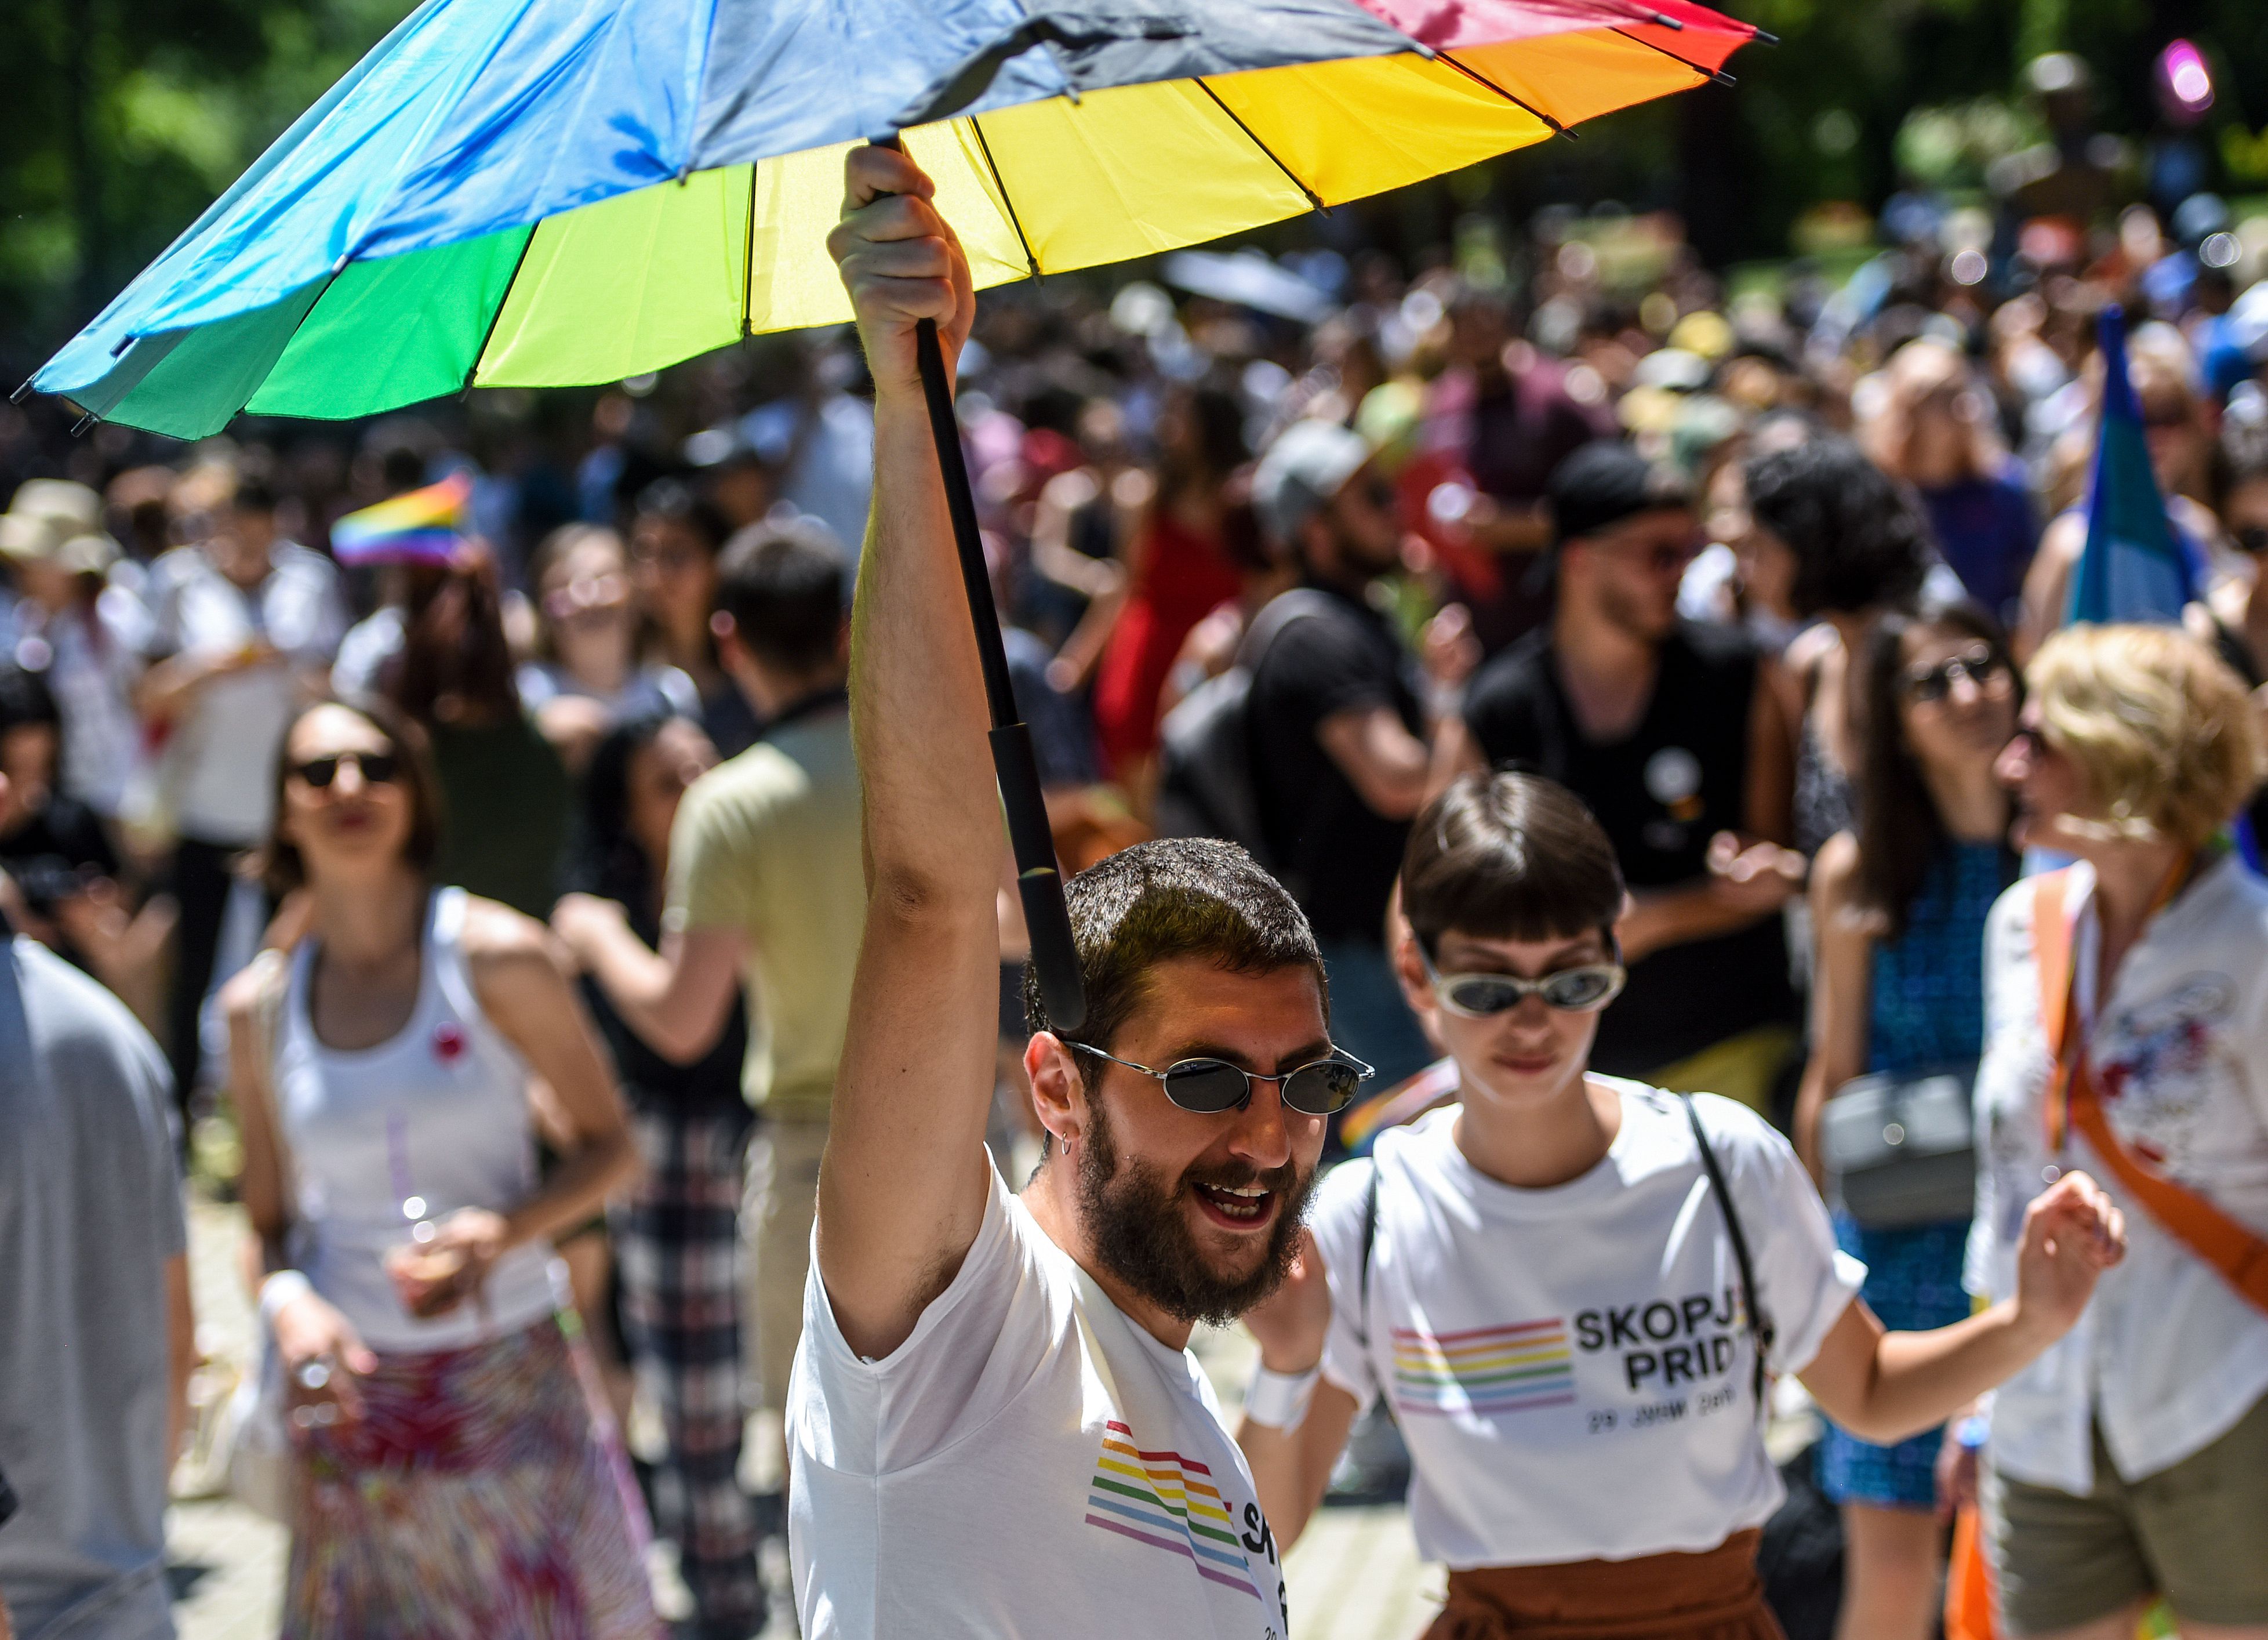 A participant holds an umbrella in the rainbow flag colours during the "Skopje Pride" march in downtown Skopje, on June 29.